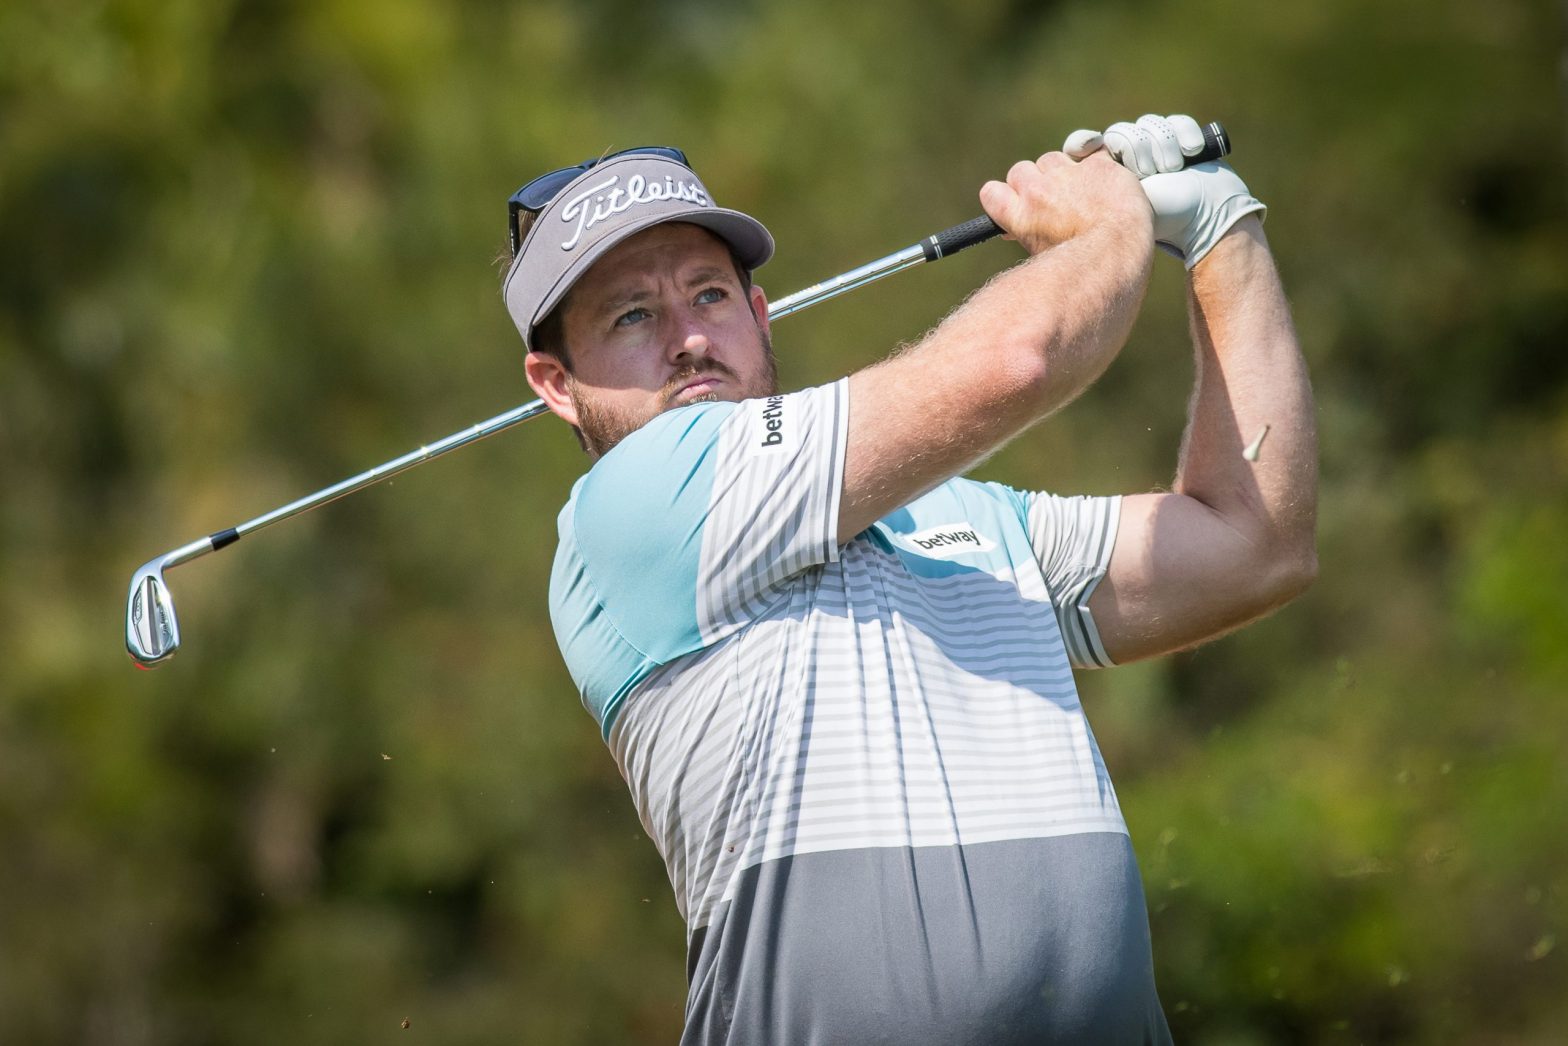 Bremner hopes laid-back fun on the course will lead to Vodacom Origins win